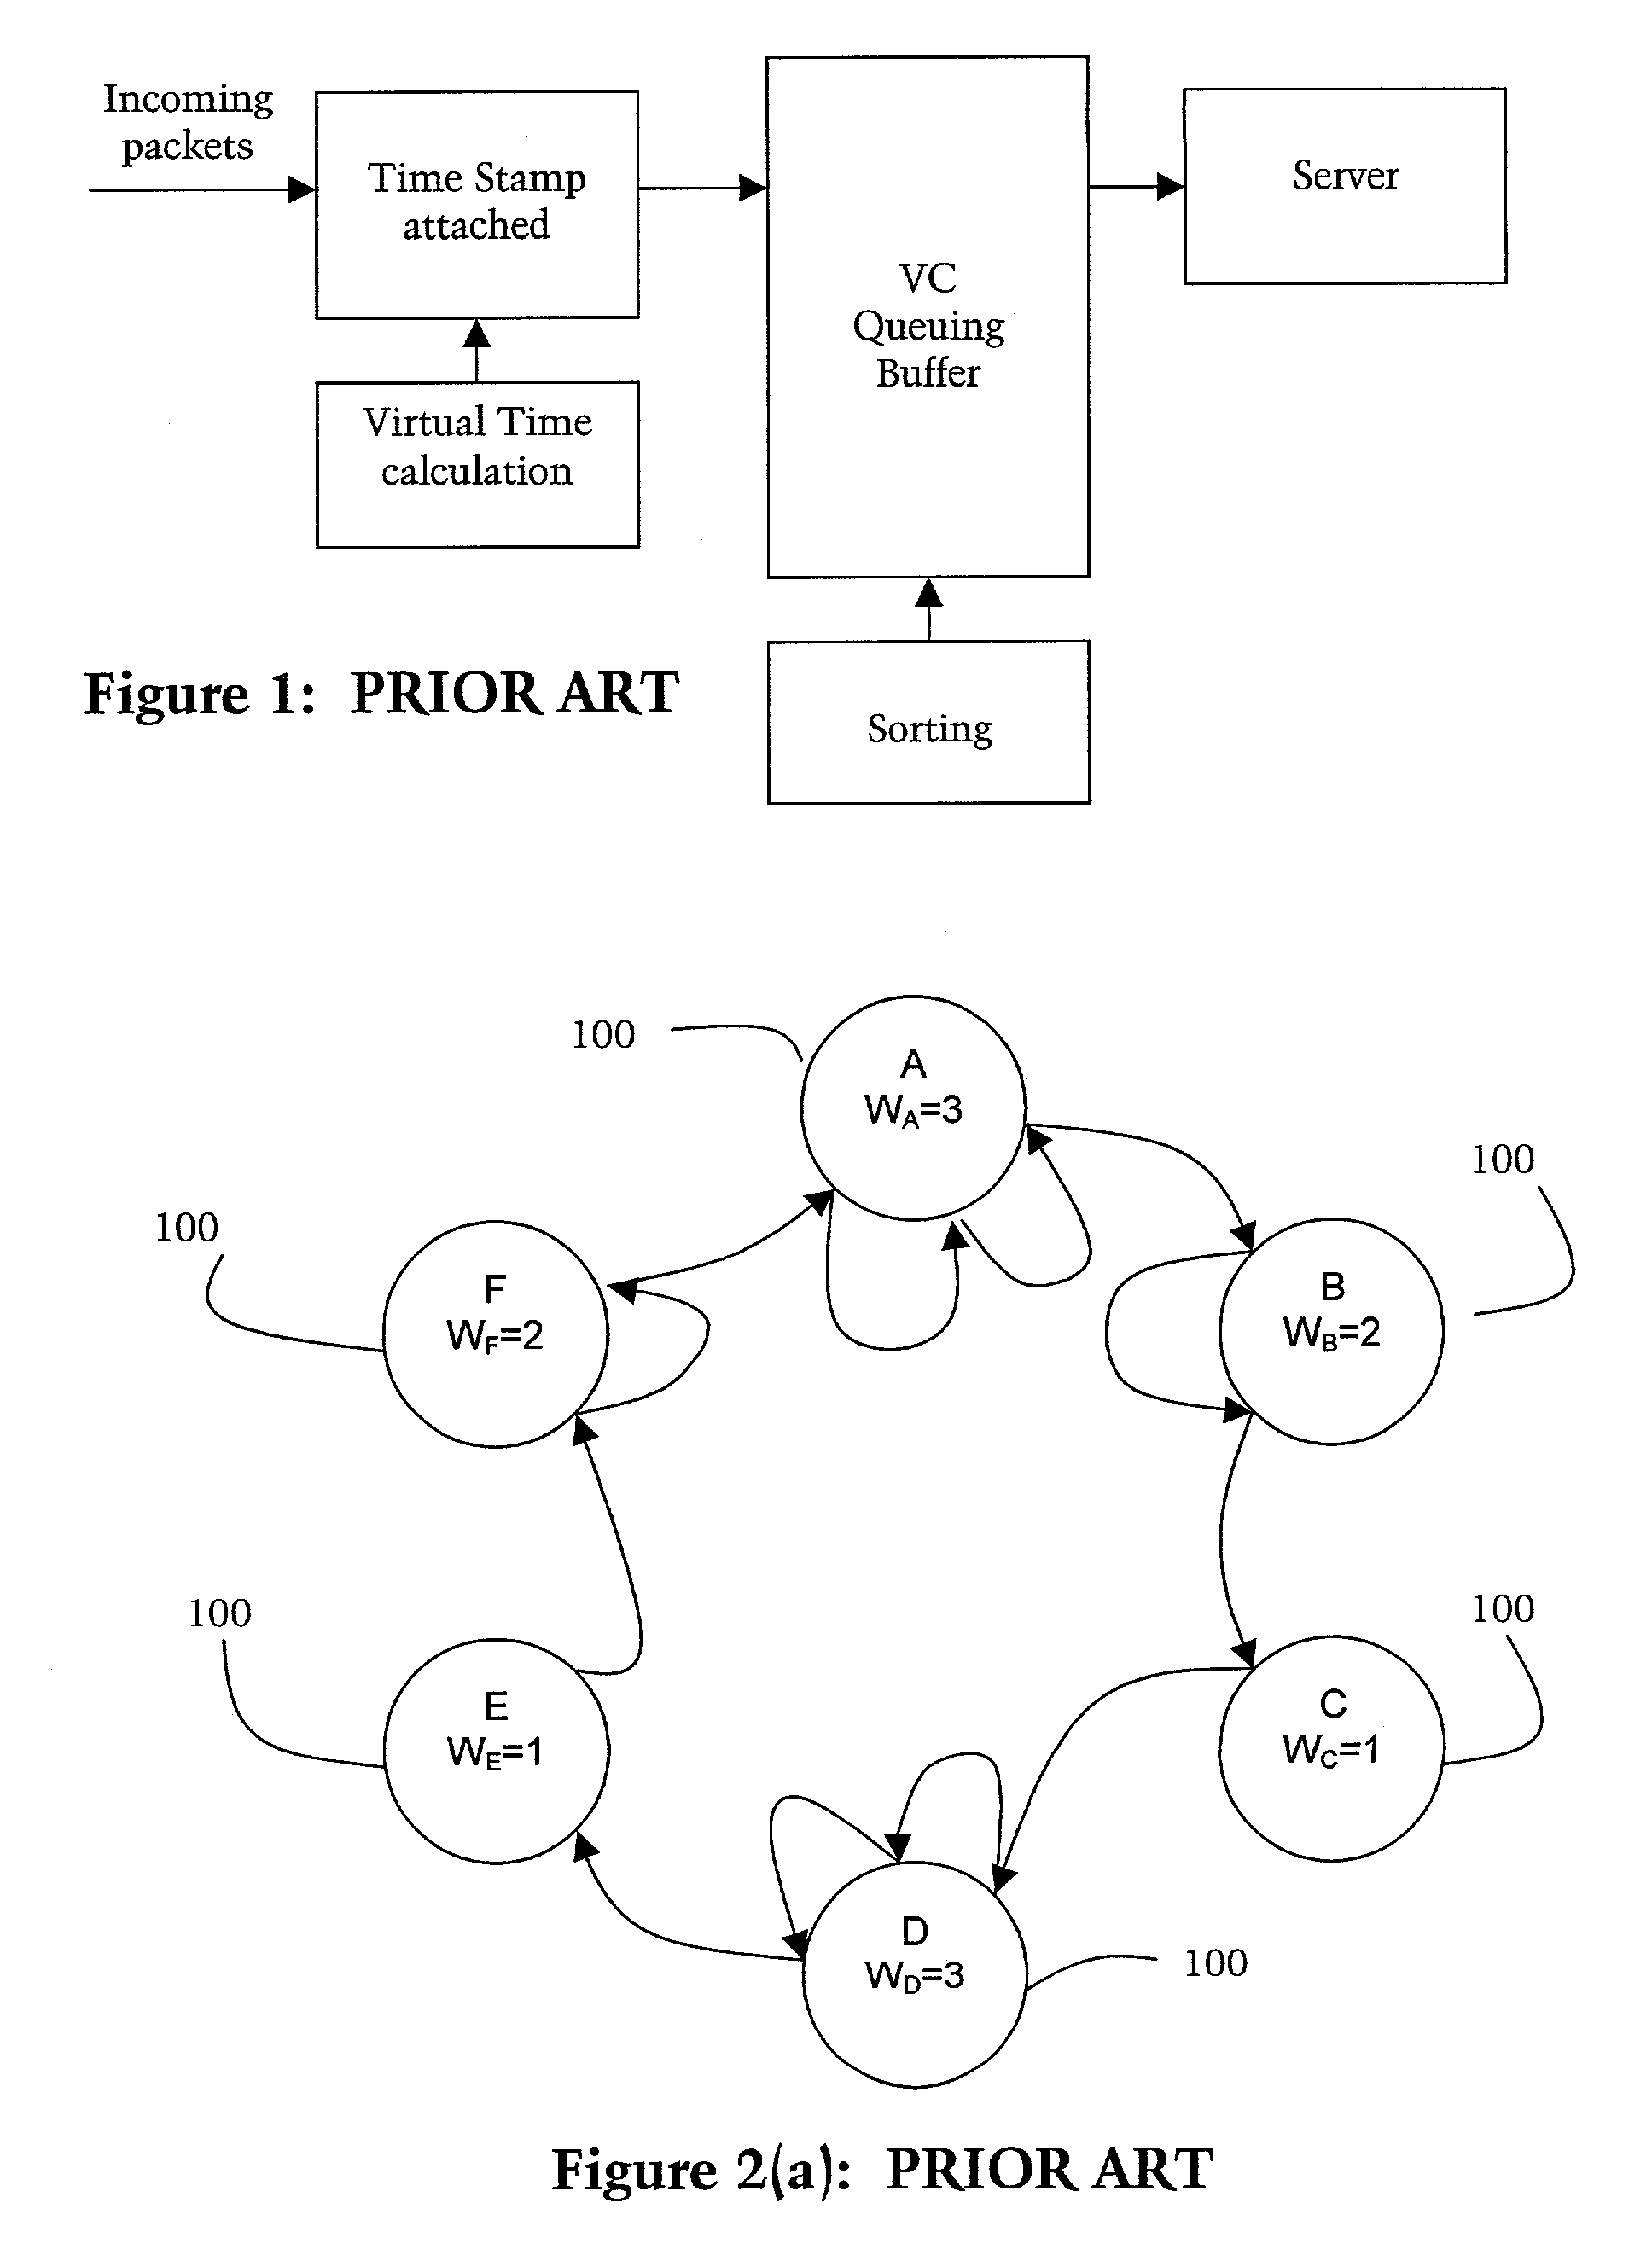 Method and apparatus for WFQ scheduling using a plurality of scheduling queues to provide fairness, high scalability, and low computation complexity